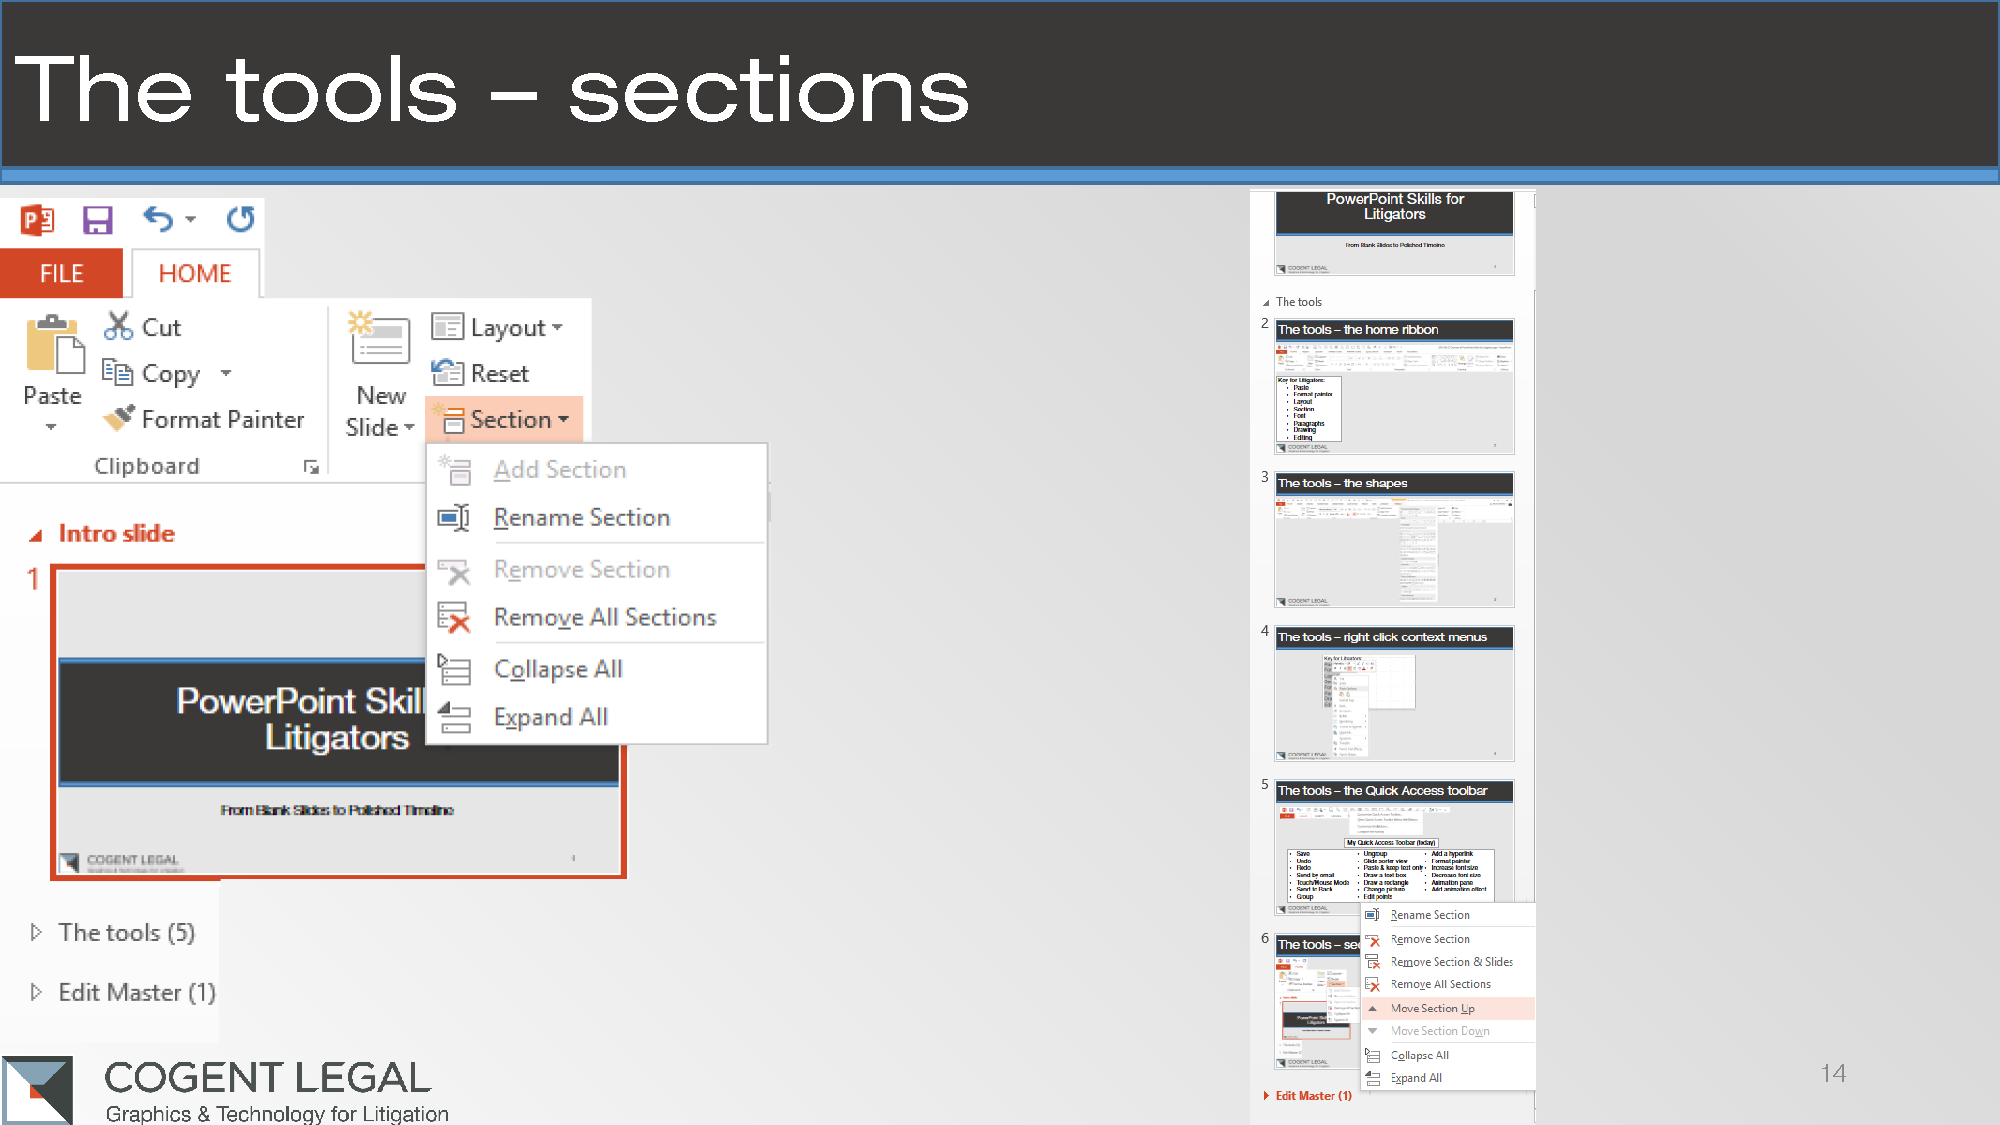 Using sections in PowerPoint allows you to organize your deck during presentation